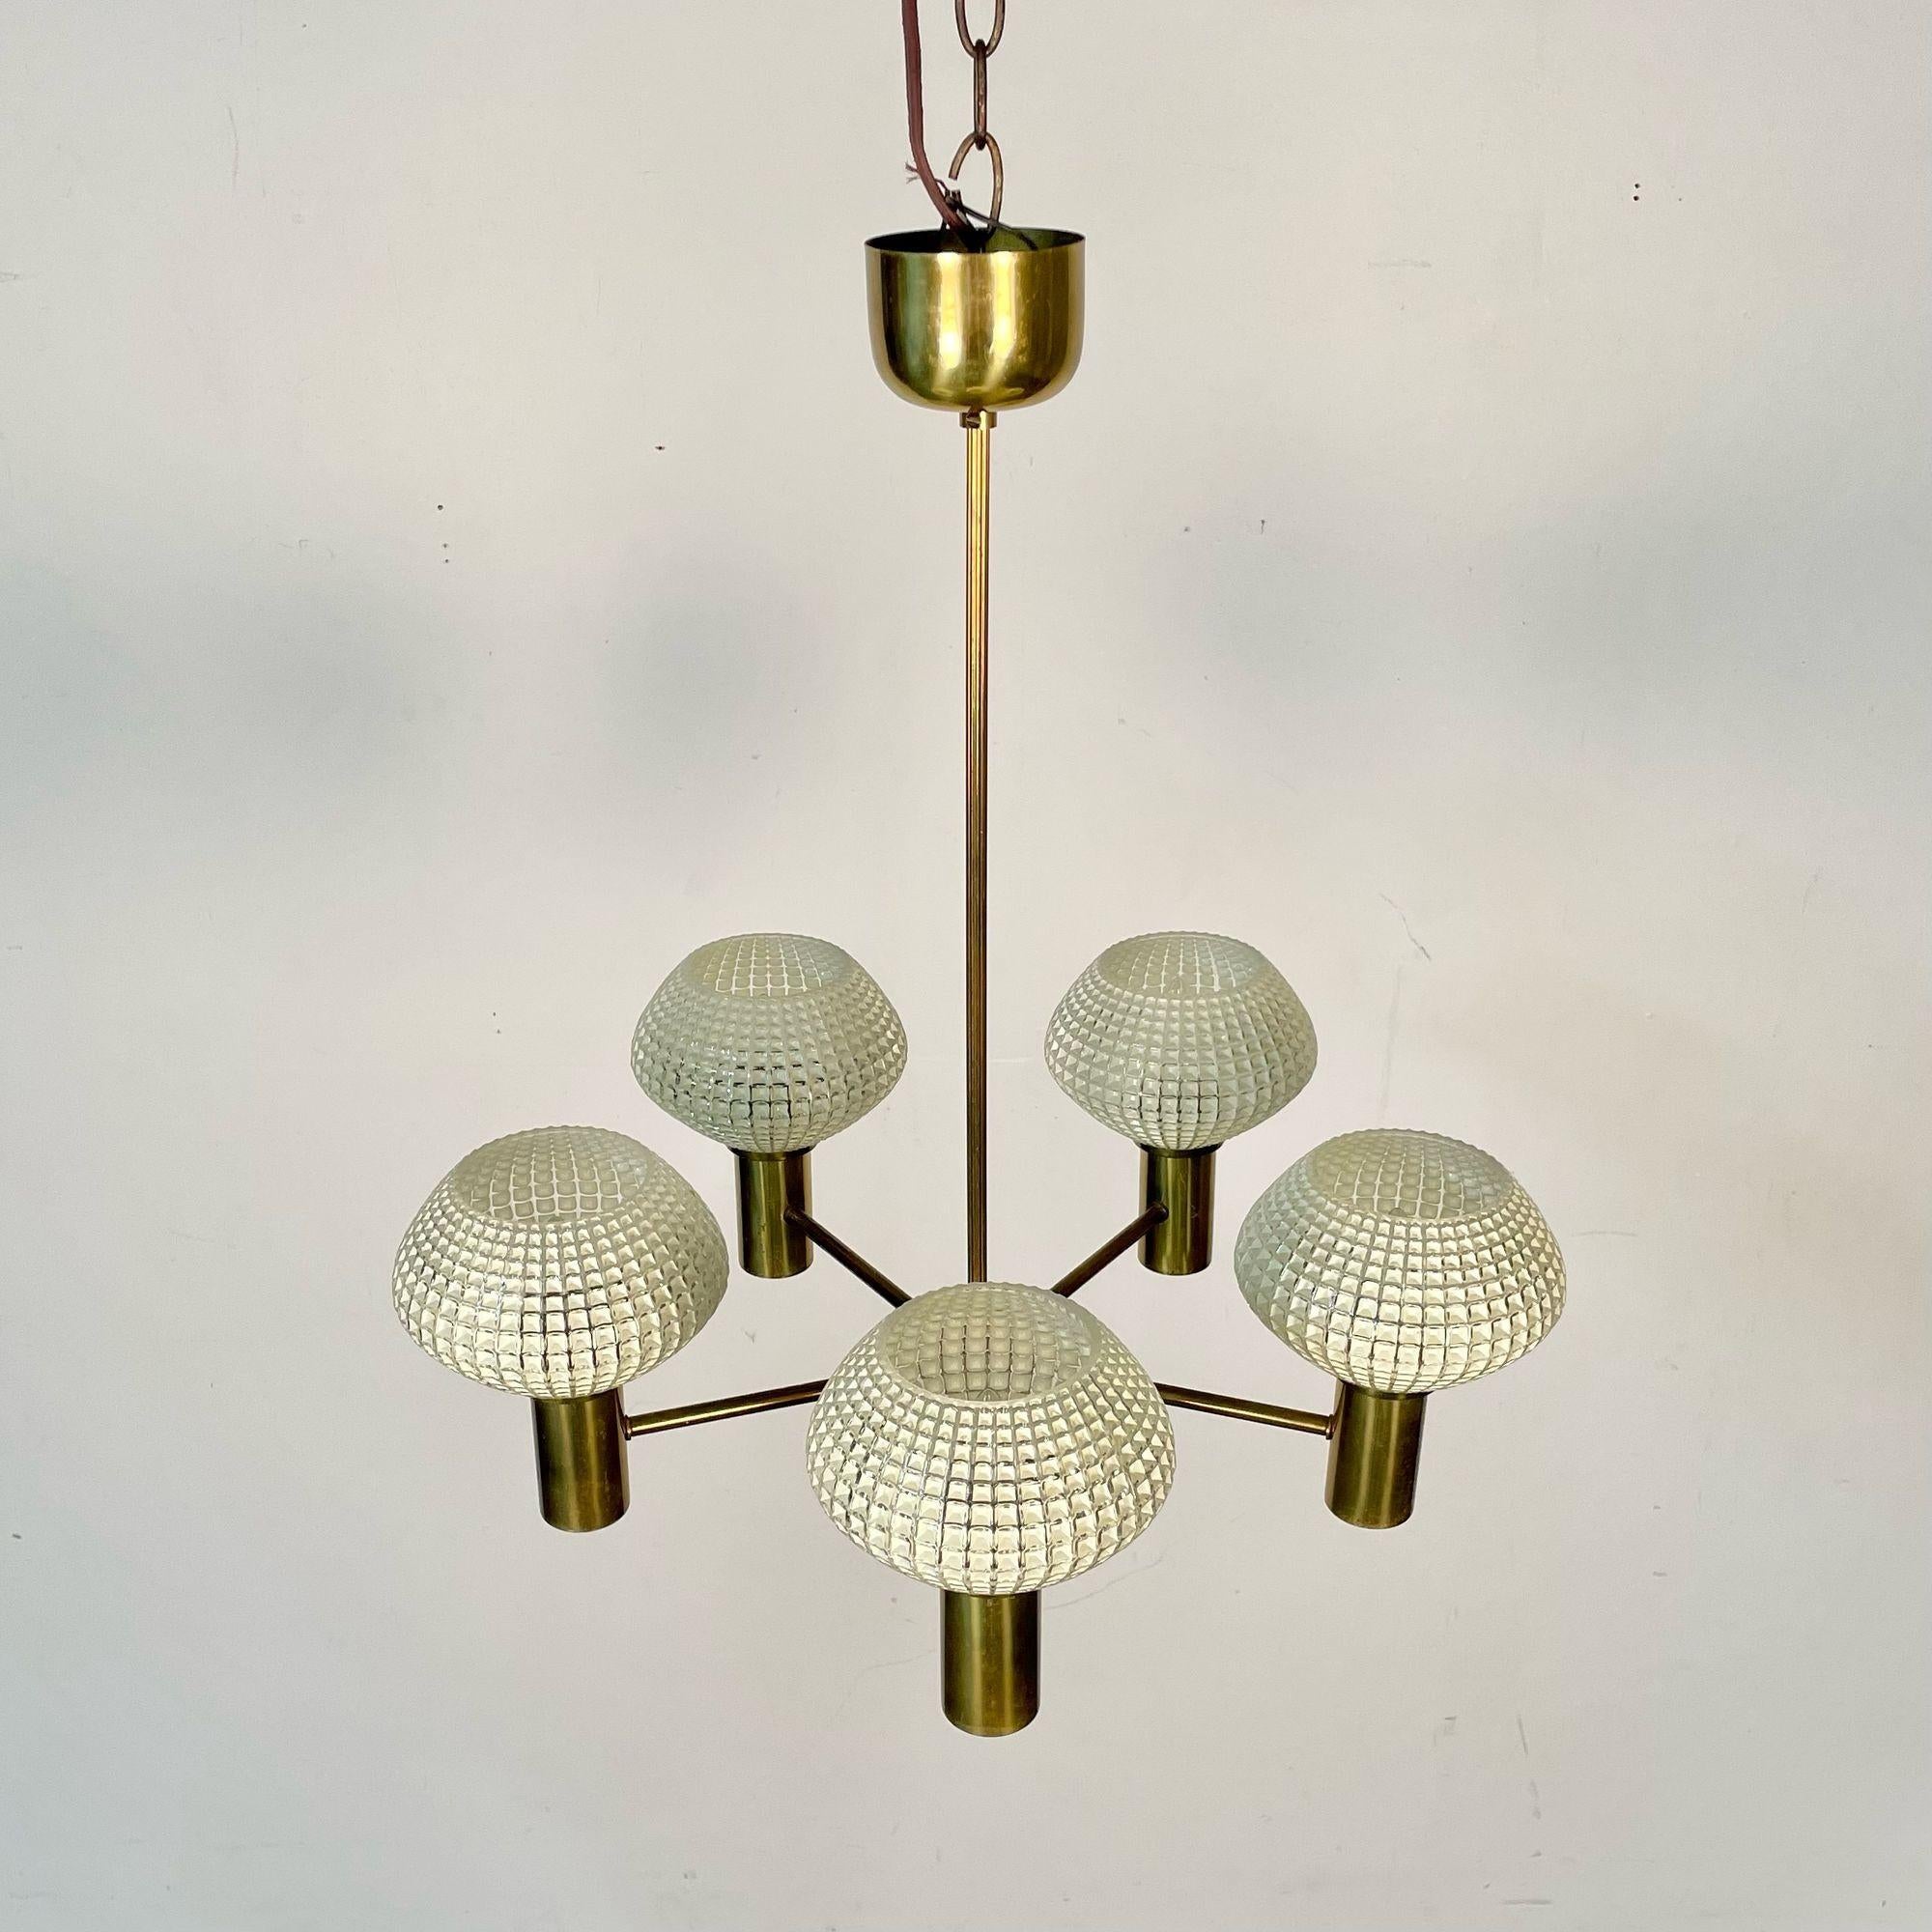 Swedish Mid-Century Modern Chandelier, Five Light, Brass and Textured Glass For Sale 13